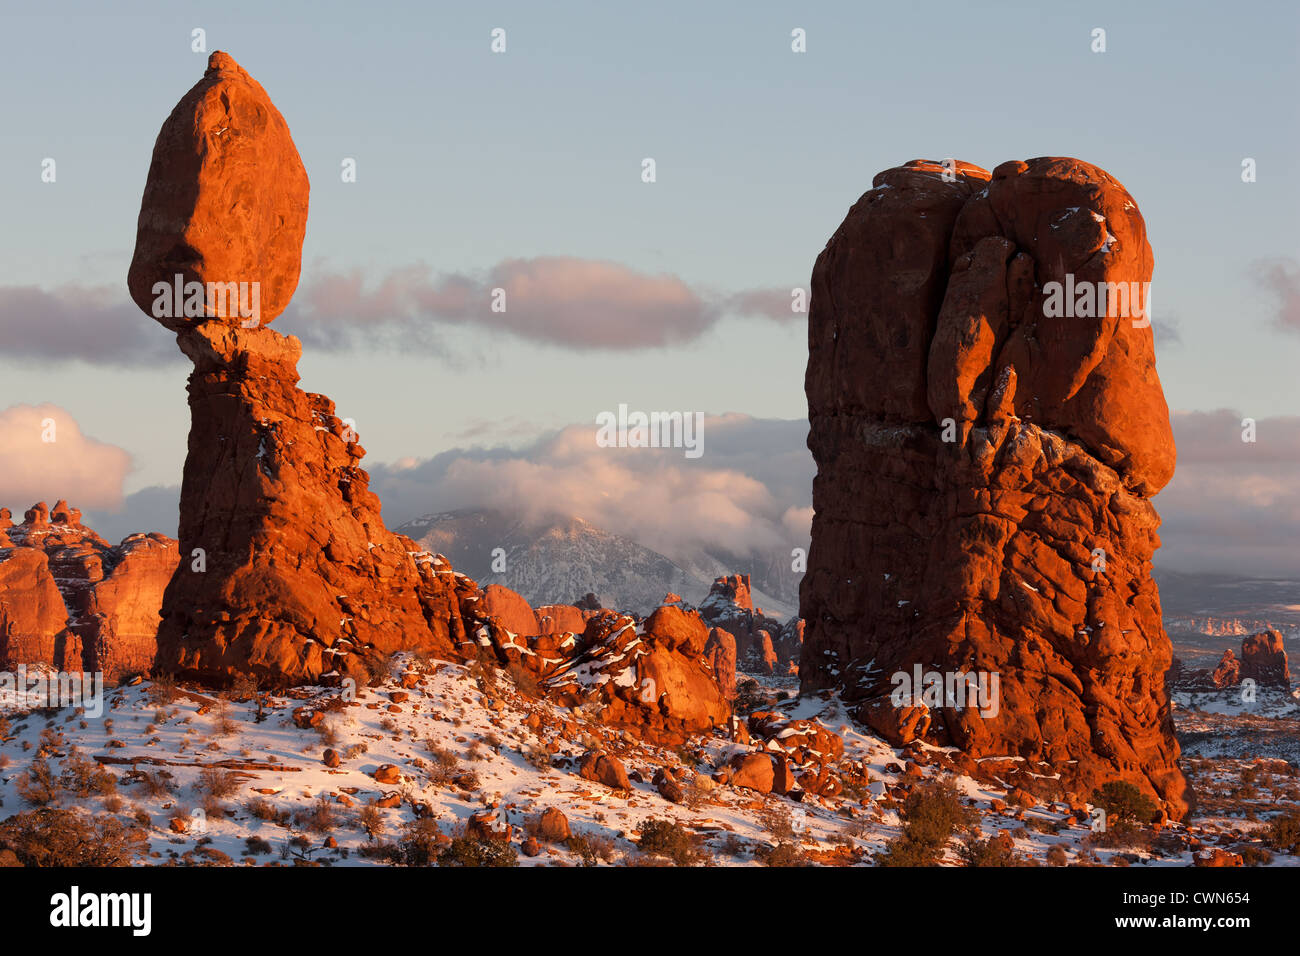 Sunset glow on Balanced Rock, a red sandstone hoodoo in Arches National Park. Grand County, Utah, USA. Stock Photo